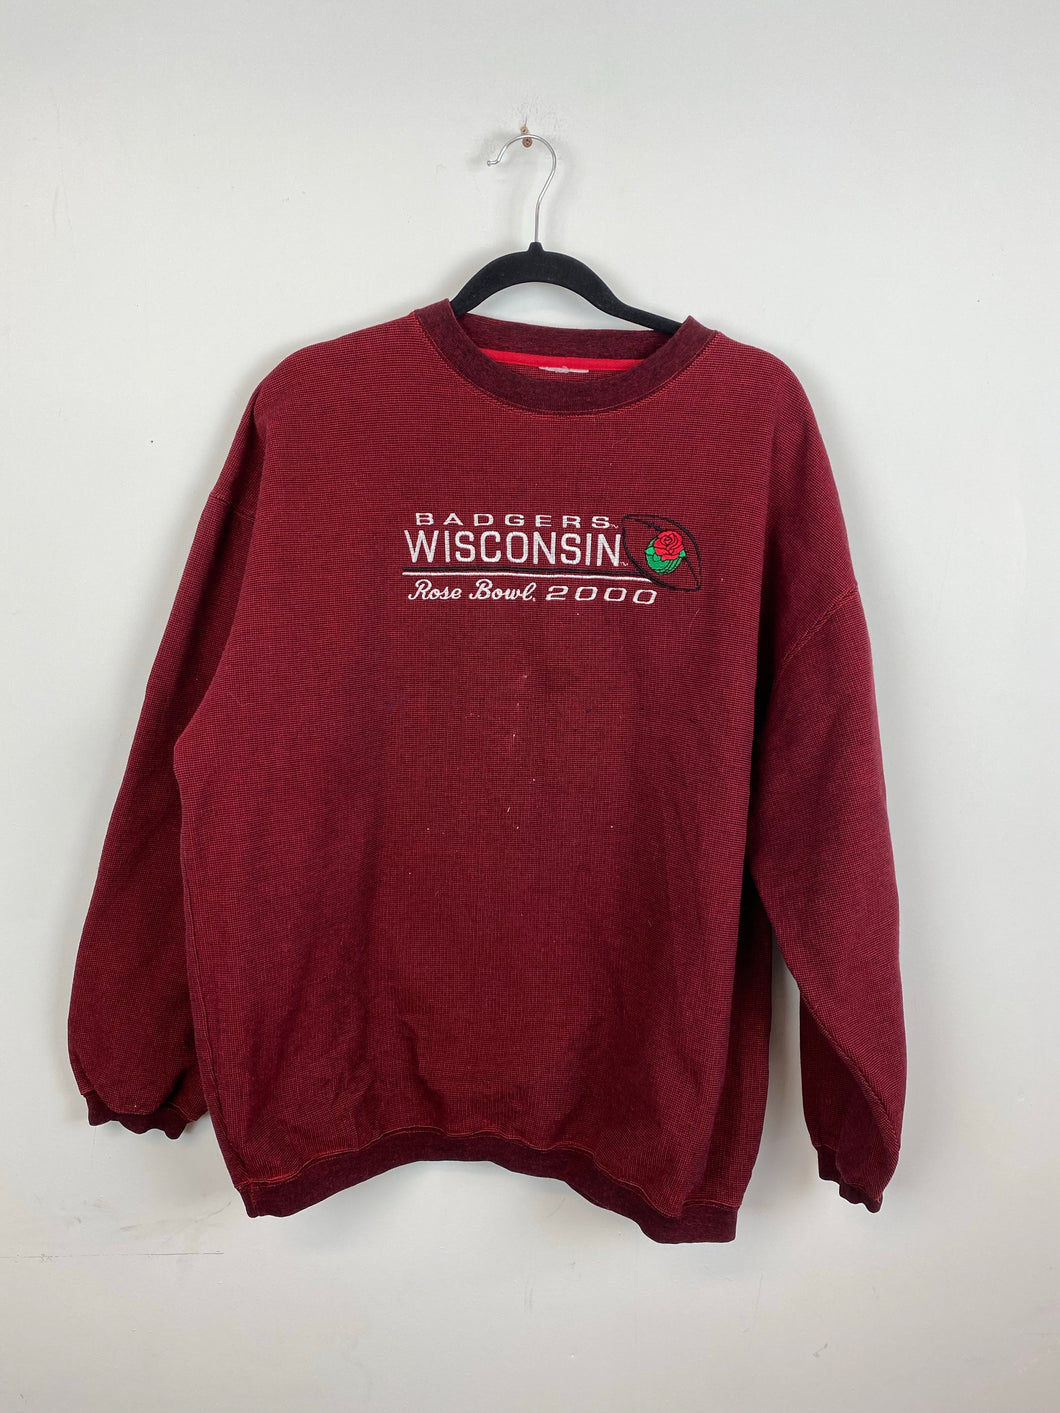 Embroidered Wisconsin crewneck